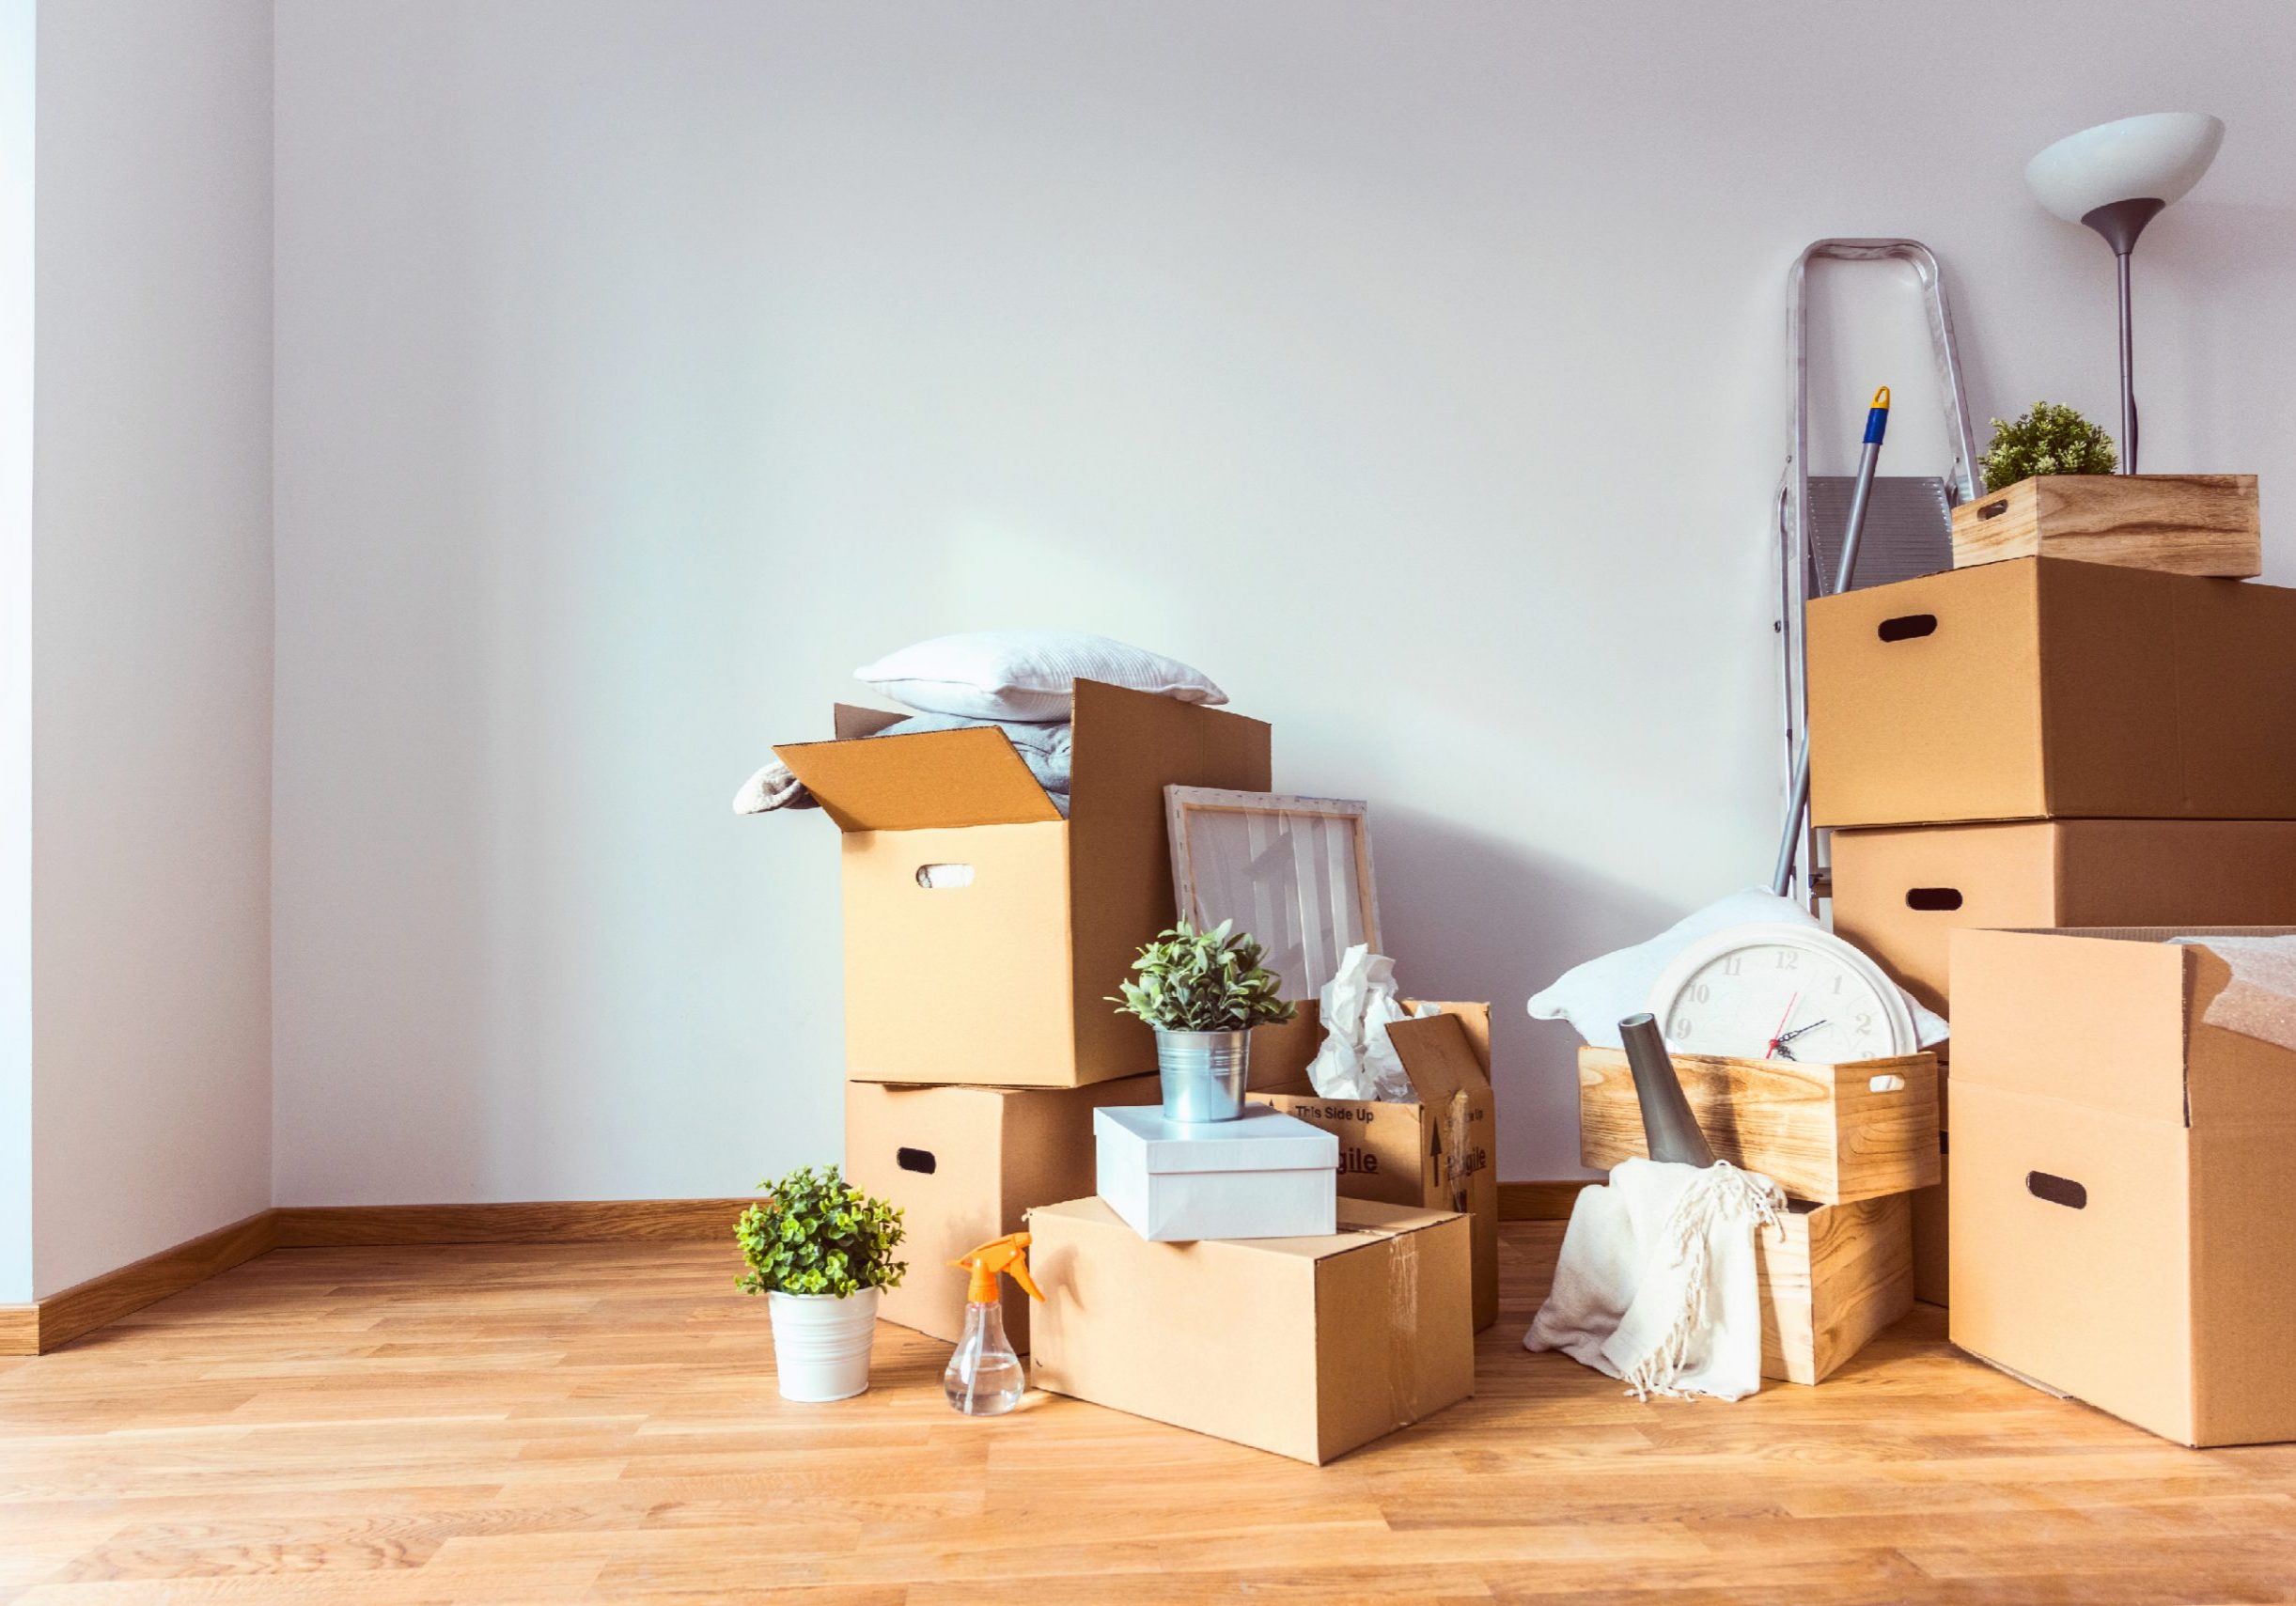 Boxes and items piled around each other to show that a move is about to happen